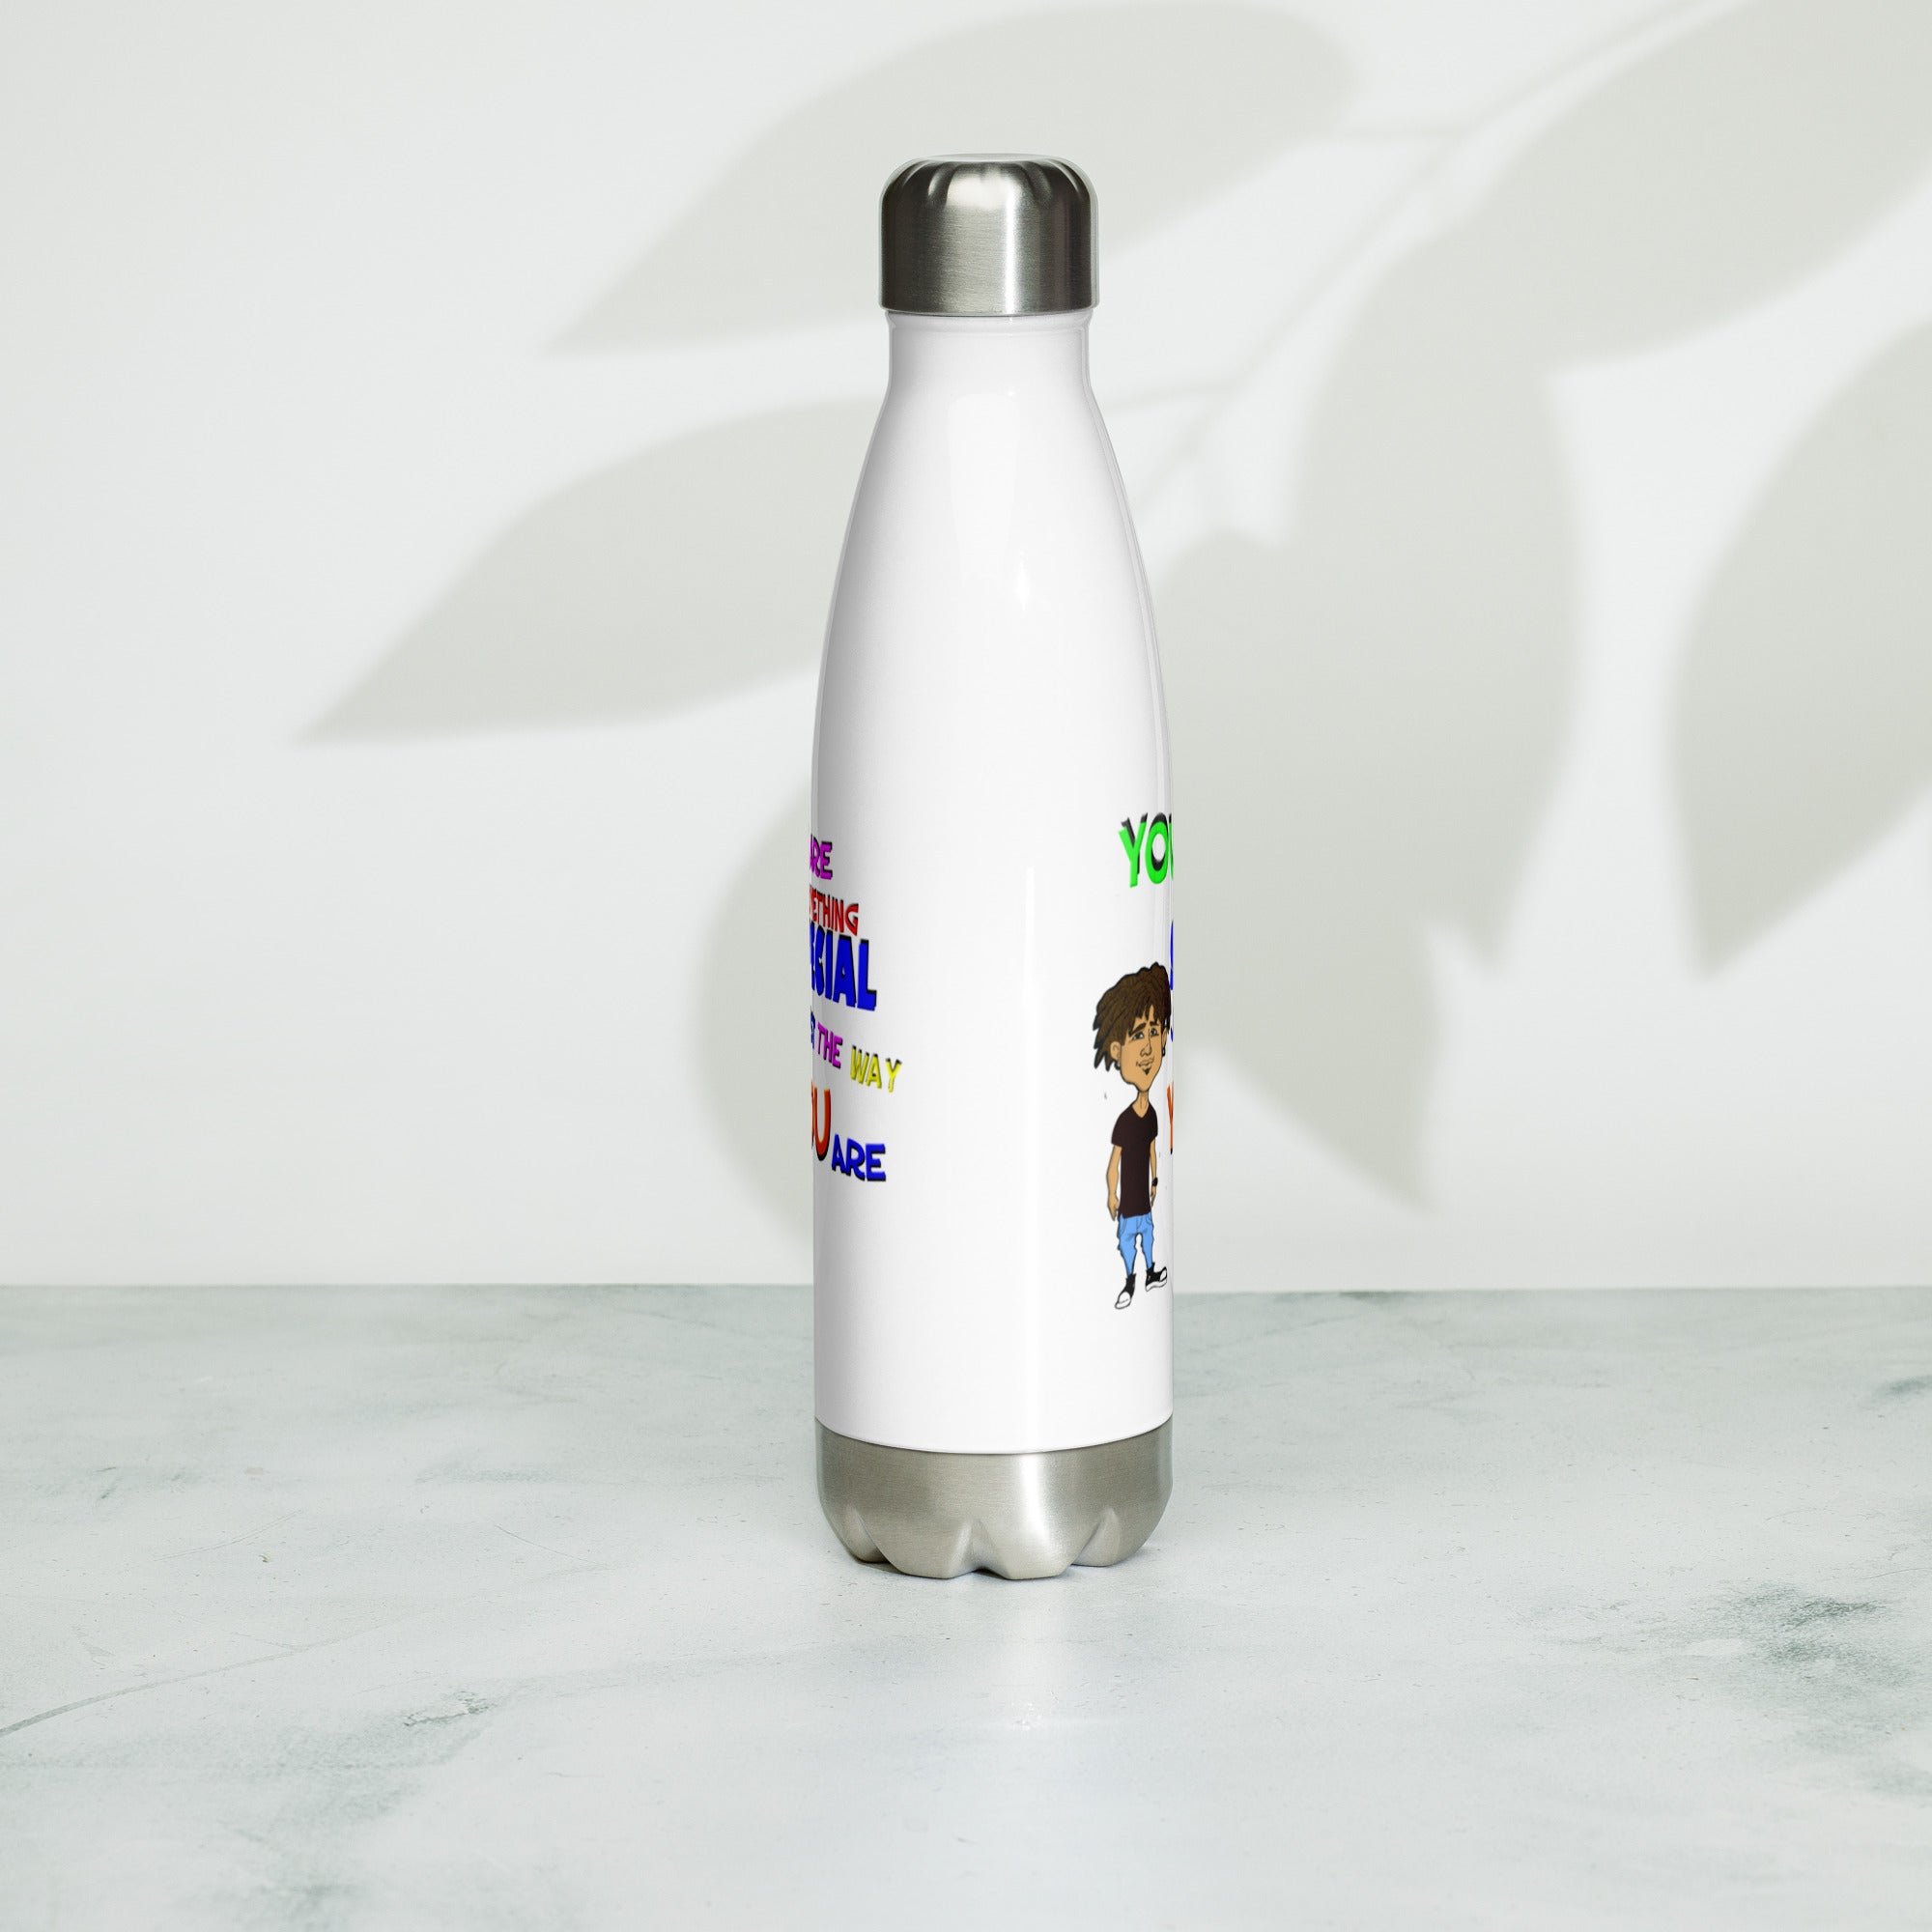 You're Something Special Stainless Steel Water Bottle (Boy image #1)